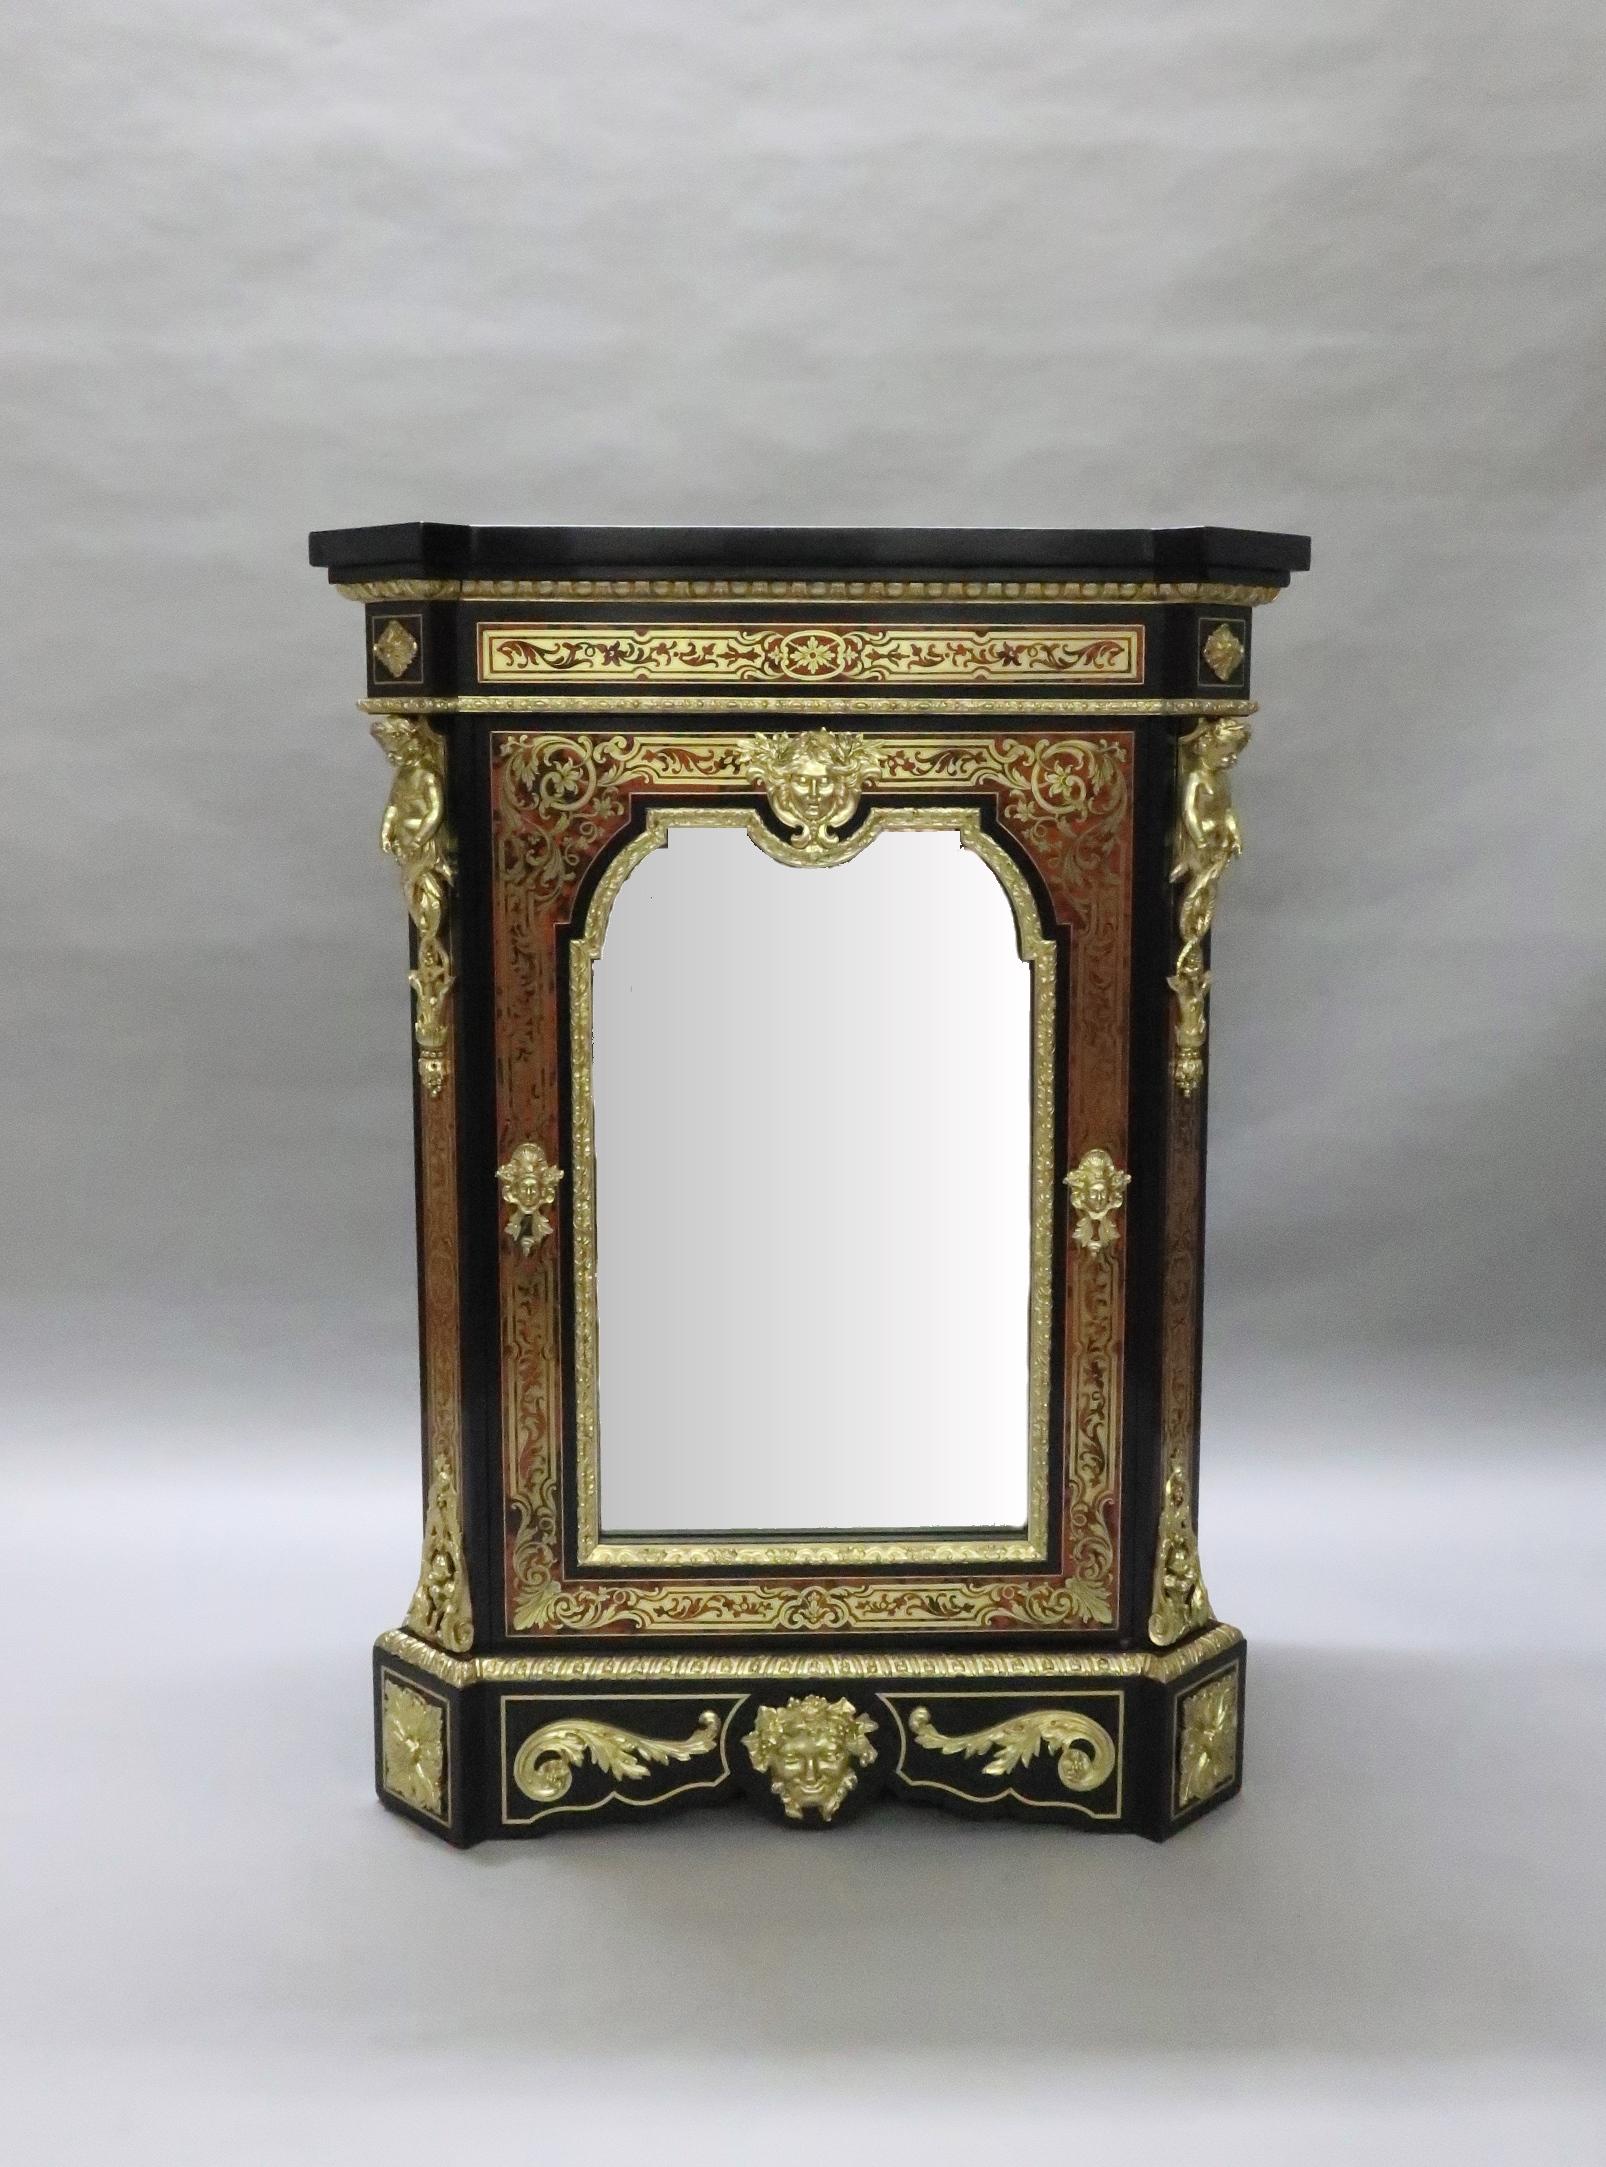 An outstanding French Napoleon III red tortoiseshell and engraved brass inlaid boulle side cabinet in the Louis XIV style by Mathieu Befort (Befort Jeune). The cabinet has scrolling floral and foliate design to the front and canted corners with